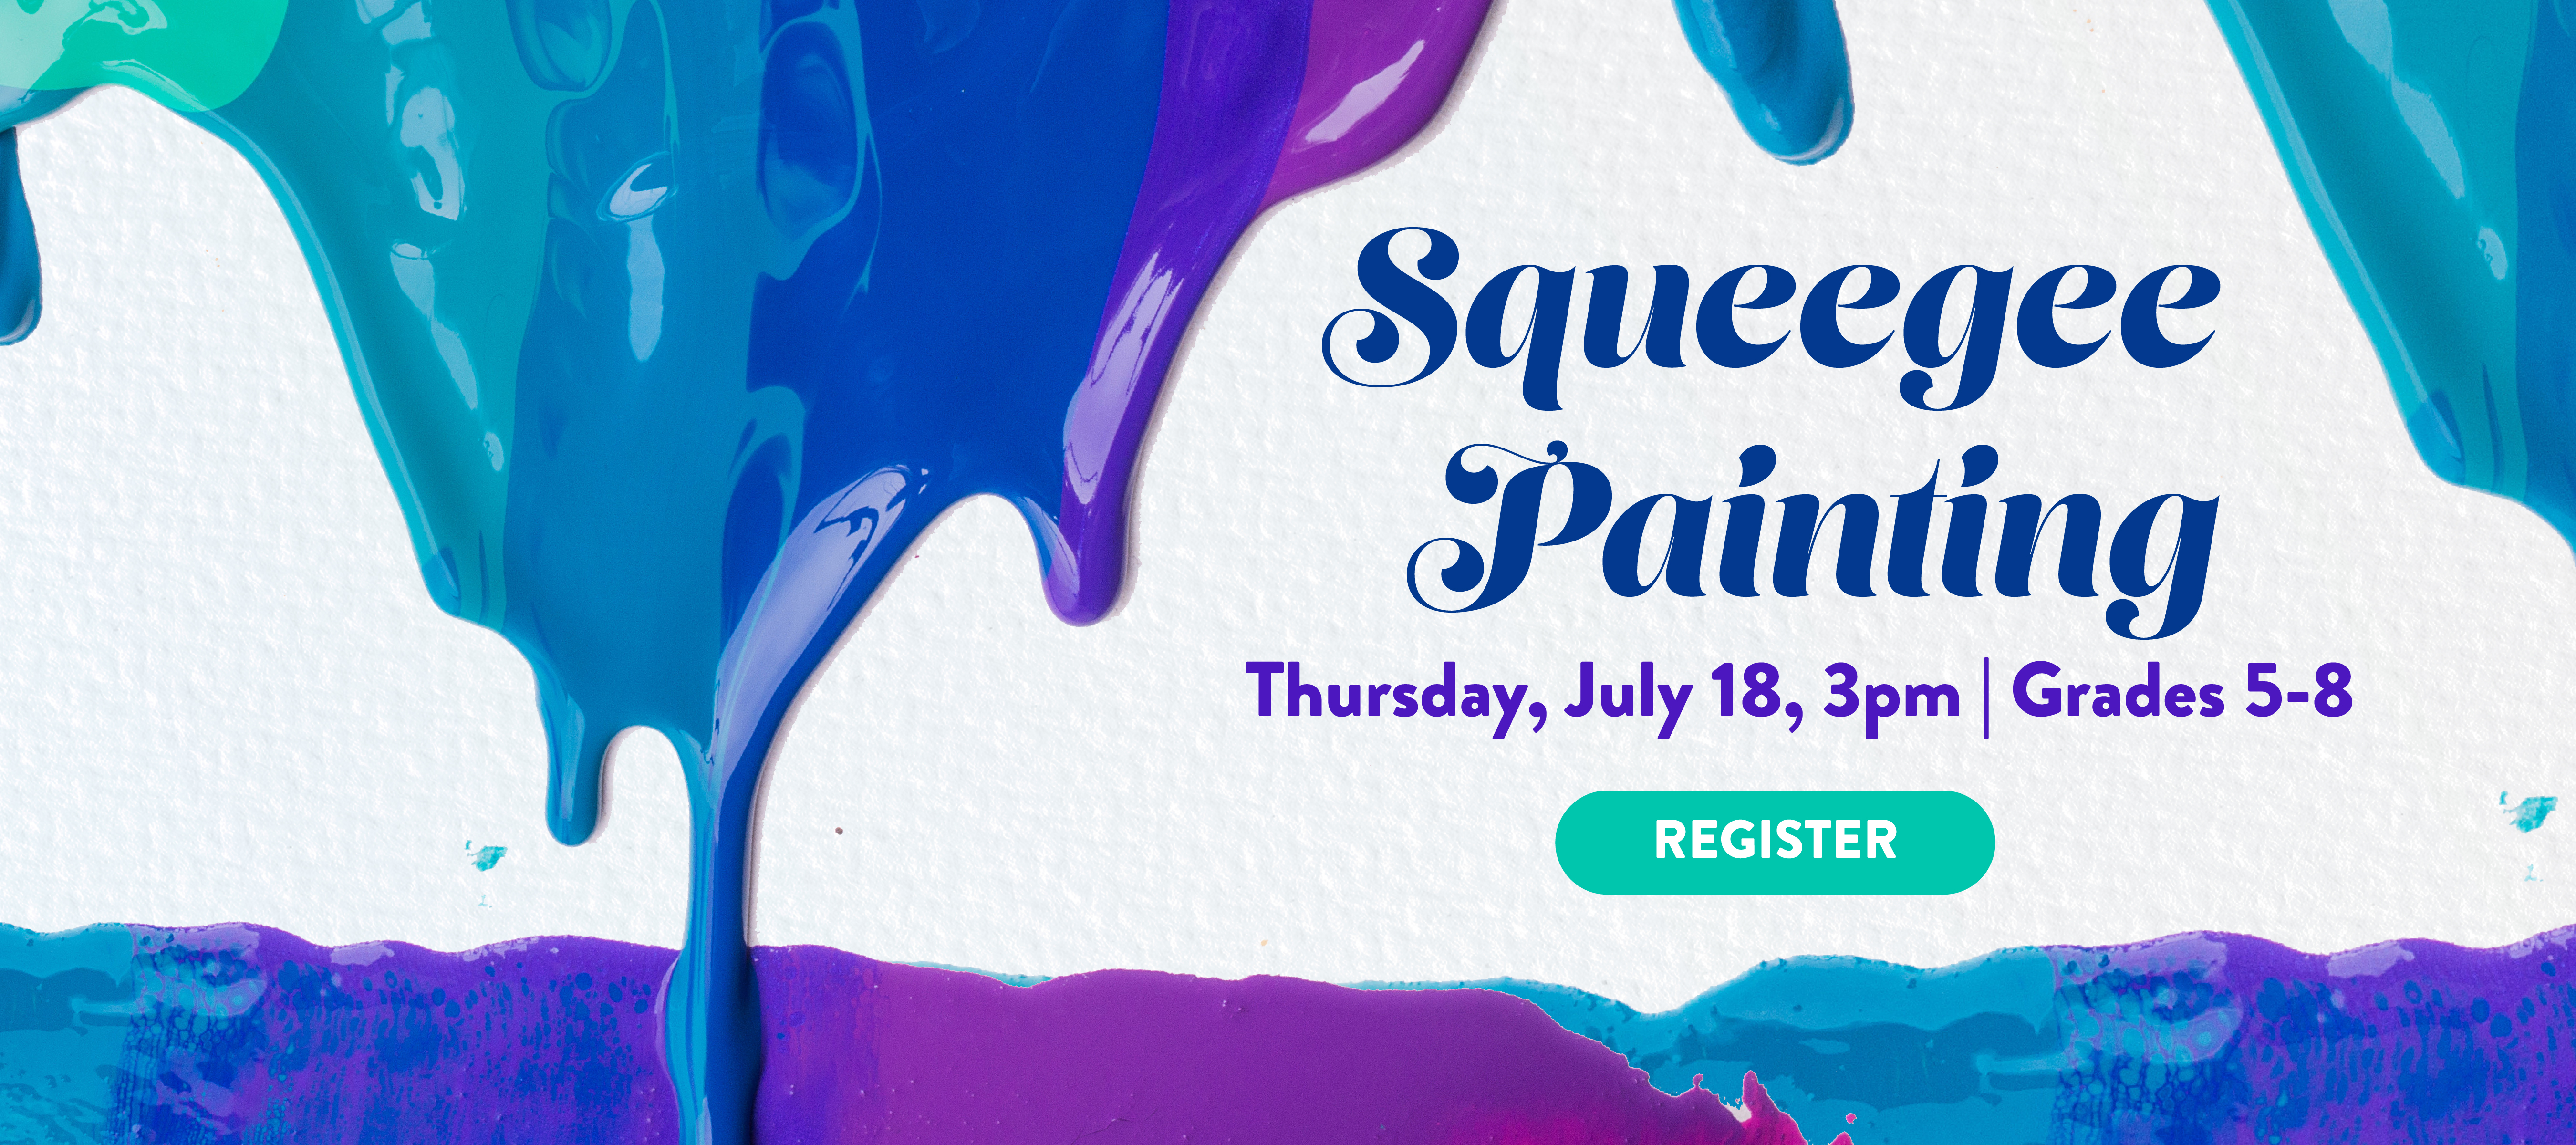 phpl, Prospect Heights Public Library, Squeegee Painting, fun painting, paint, Youth, summer fun, creative painting, squeegee, craft, canvas